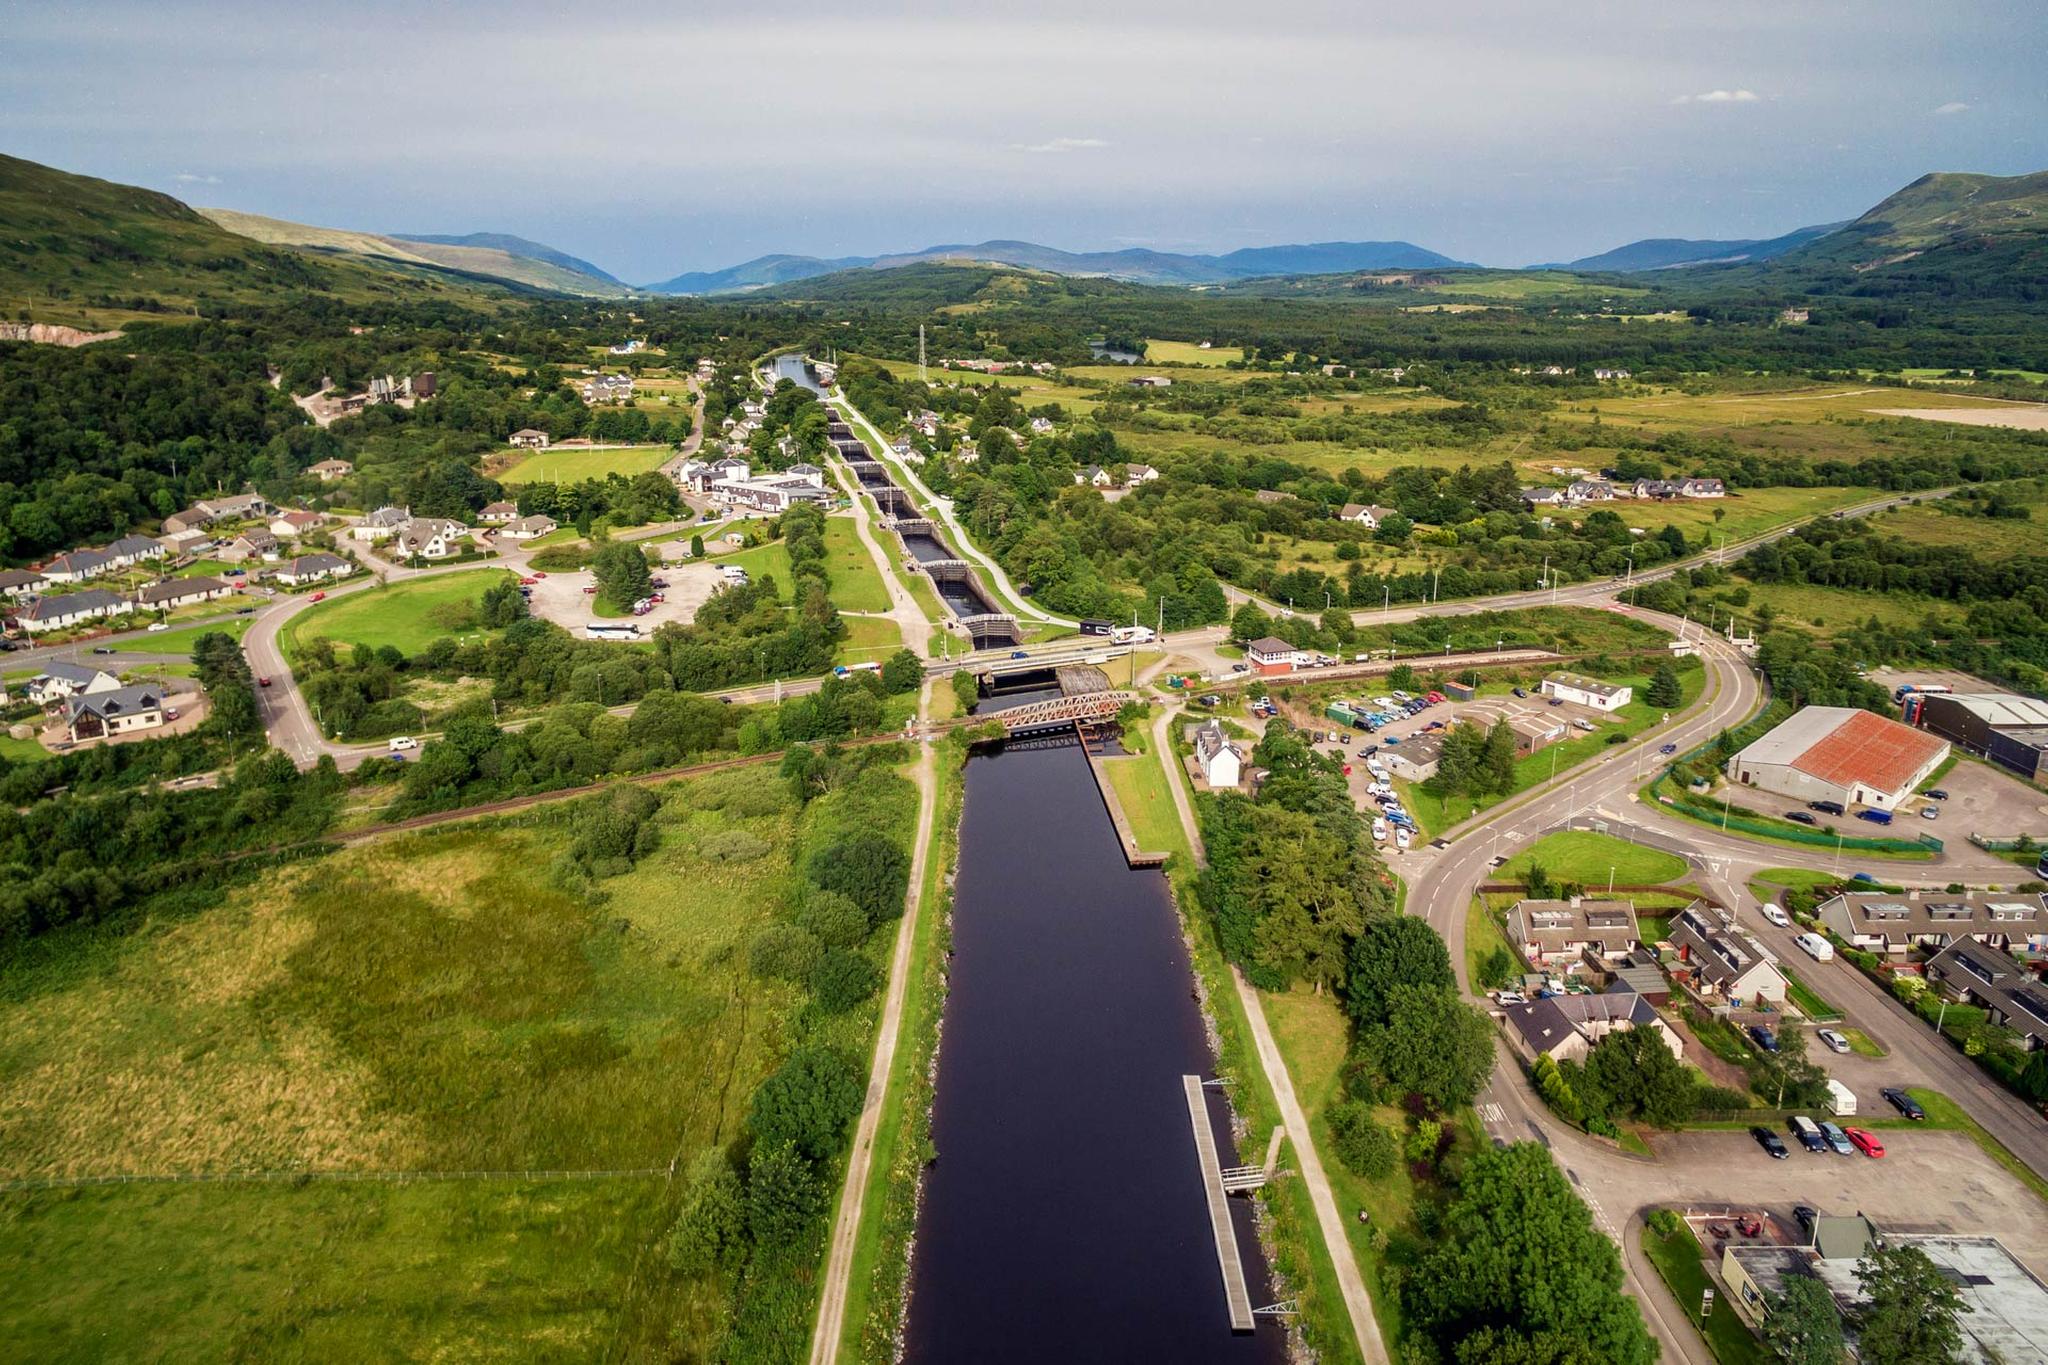 https://cimg.visitscotland.com/cms-images/destinations/attractions/caledonian-canal-above?size=lg